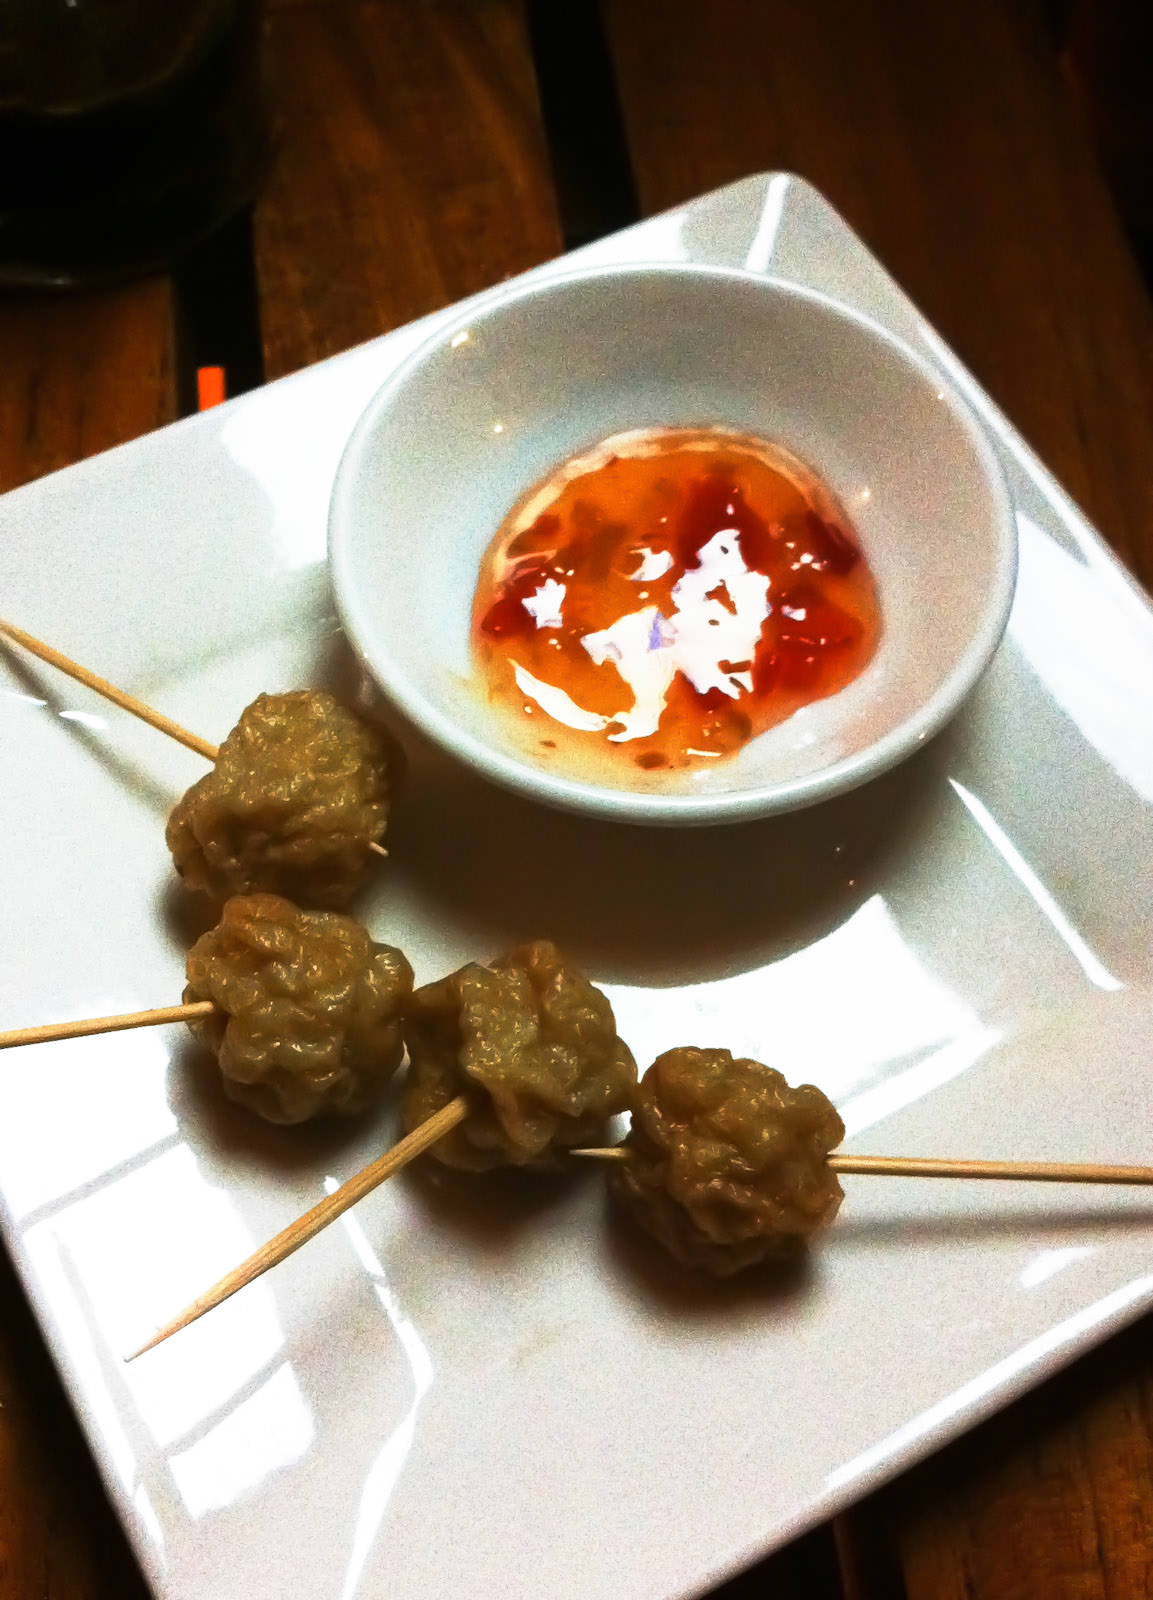 Cocktail hour nibbles - fish balls on skewers with sweet chilli sauce